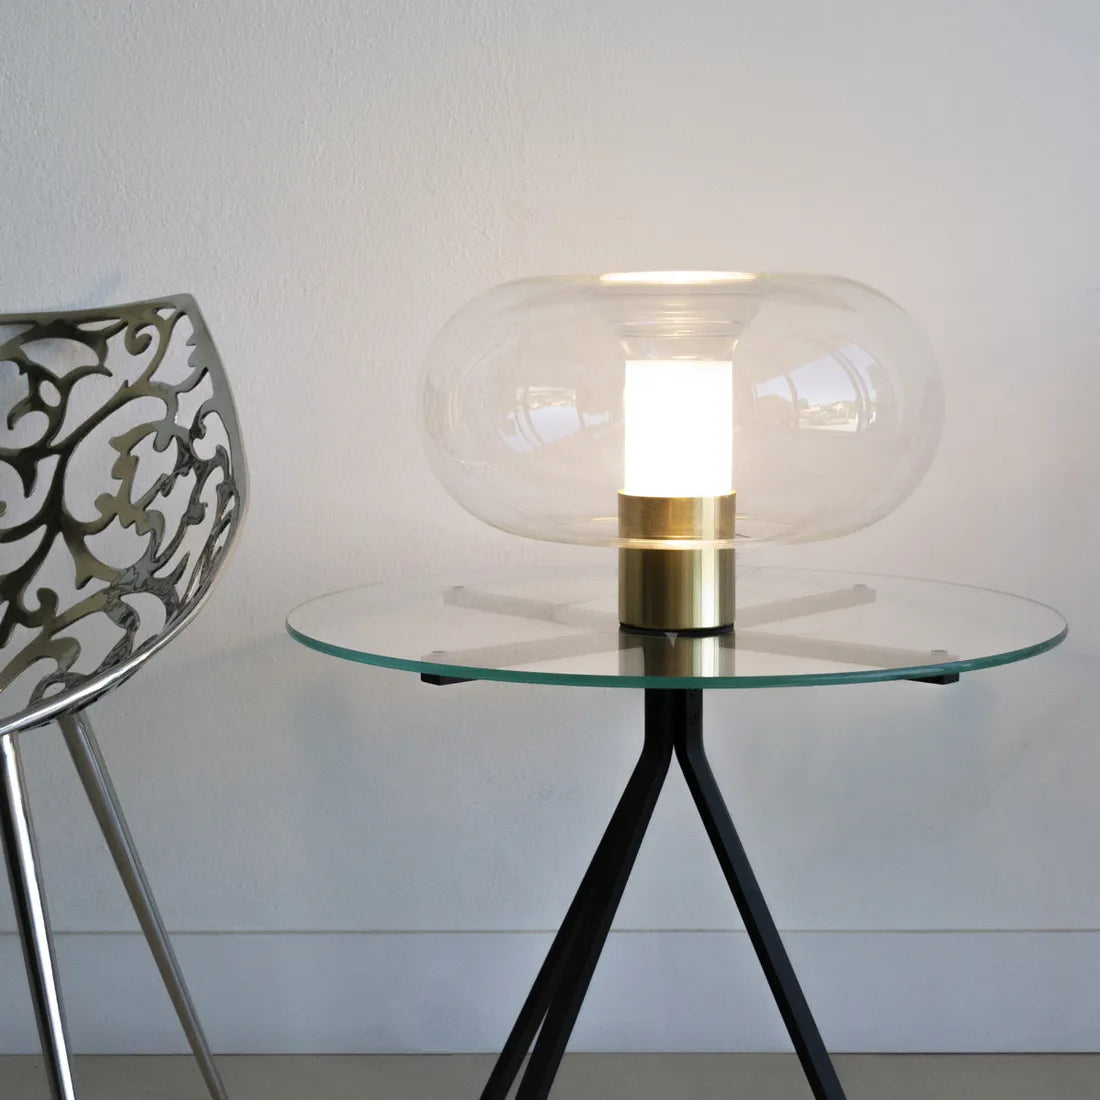 Glass dining table lamp design, best glass table light, table lamps online india, clear transparent glass table lamp for Living room